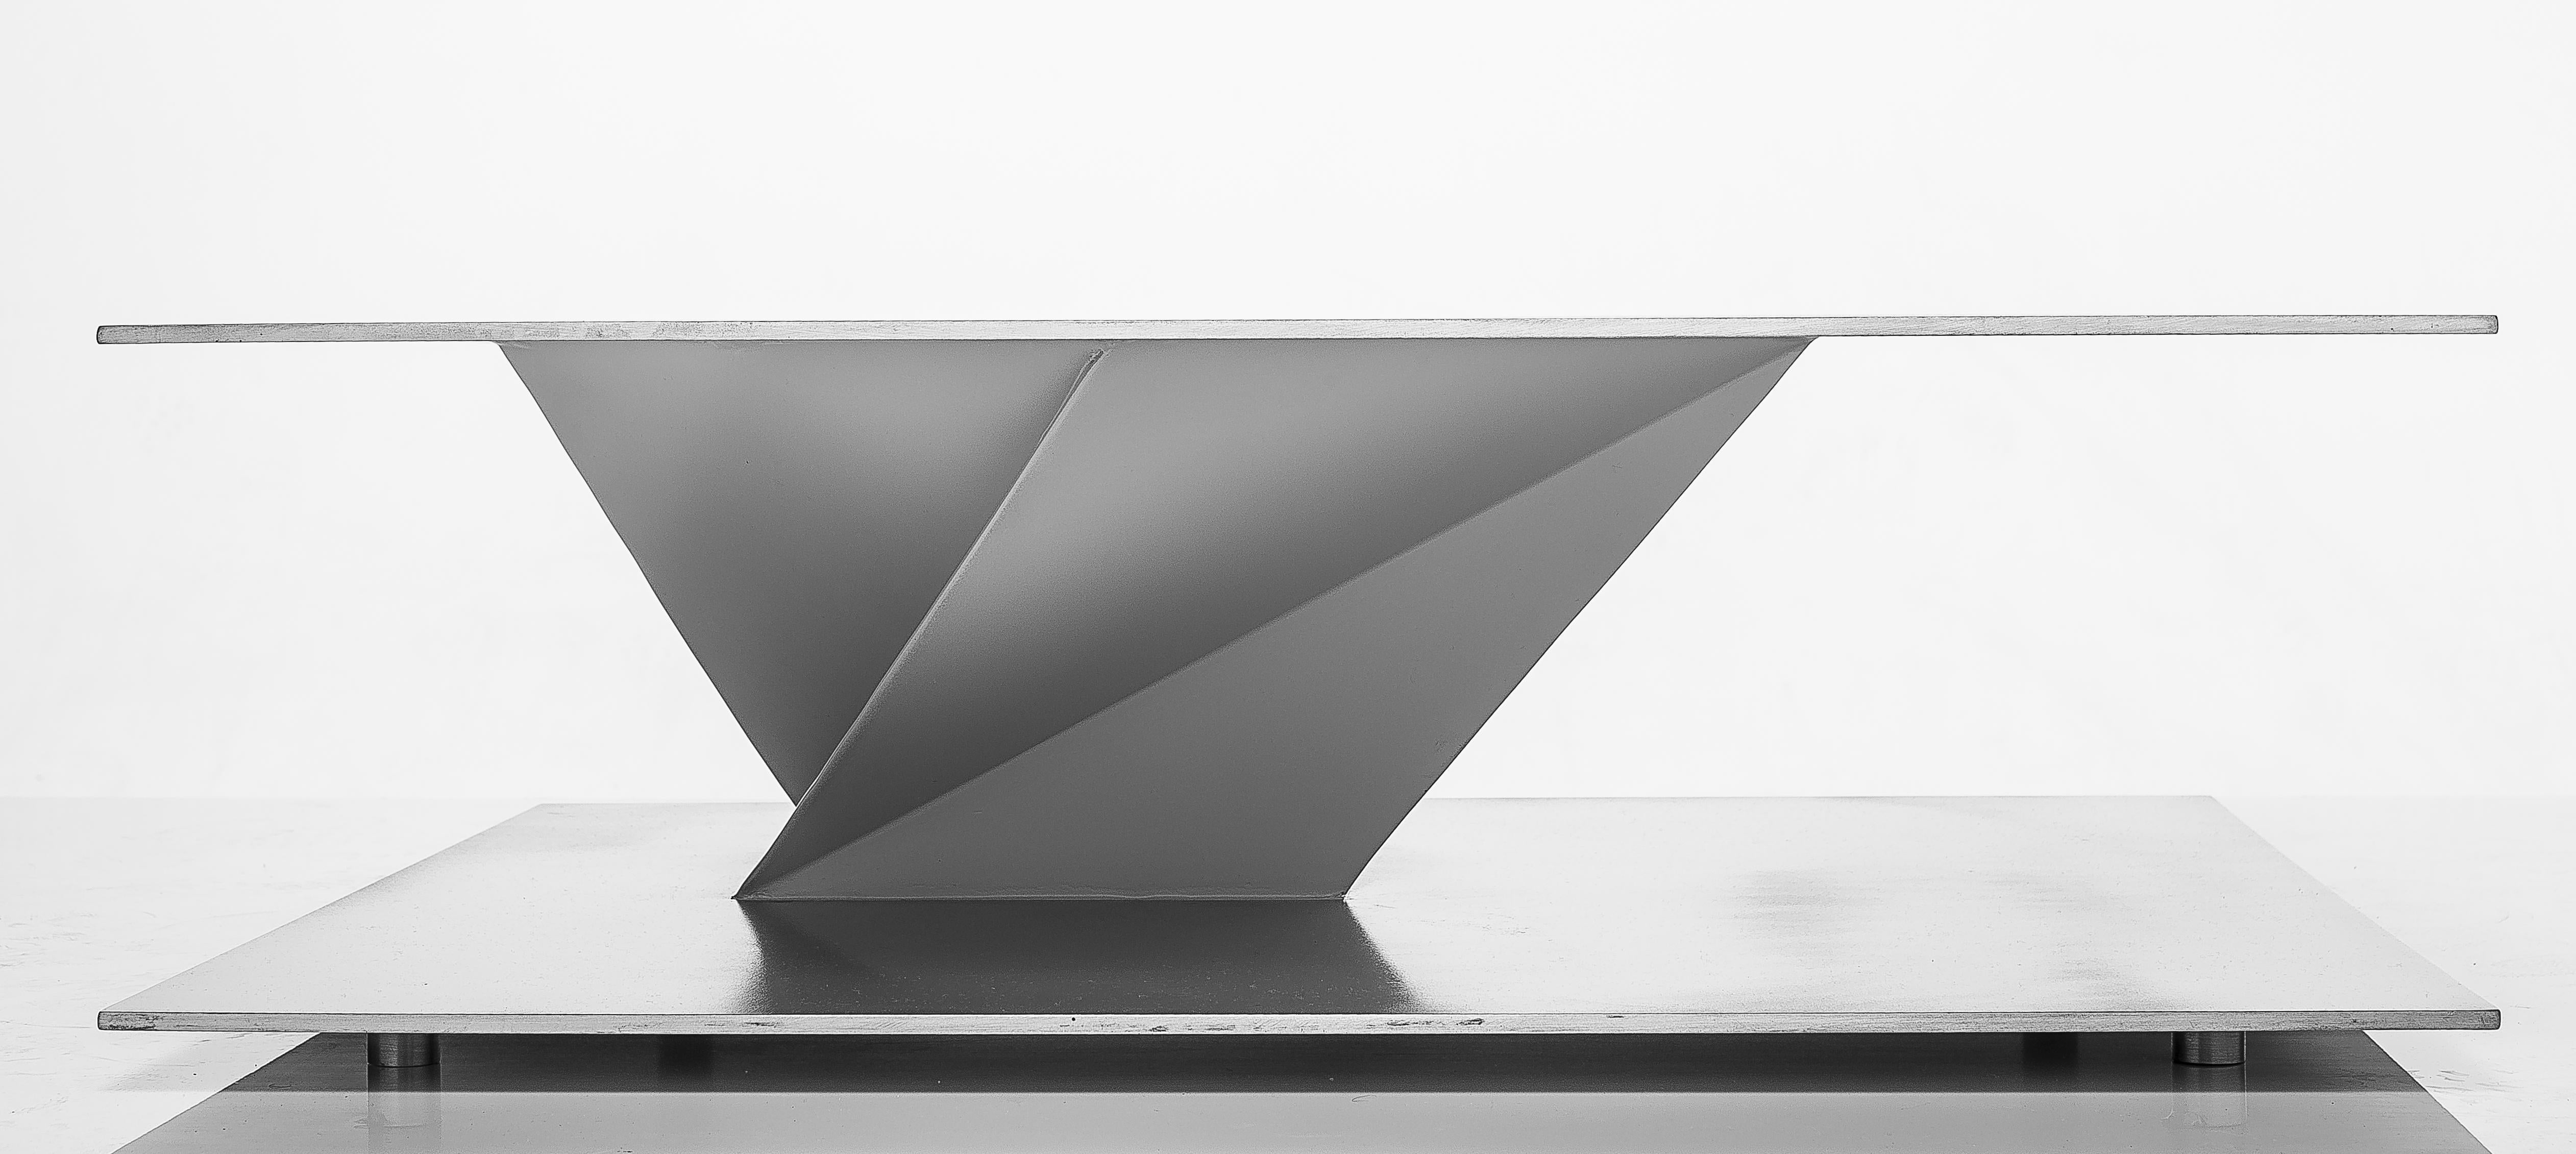 Metal Coffee Table by Andrea Macruz, Brazilian Contemporary Design In New Condition For Sale In New York, NY